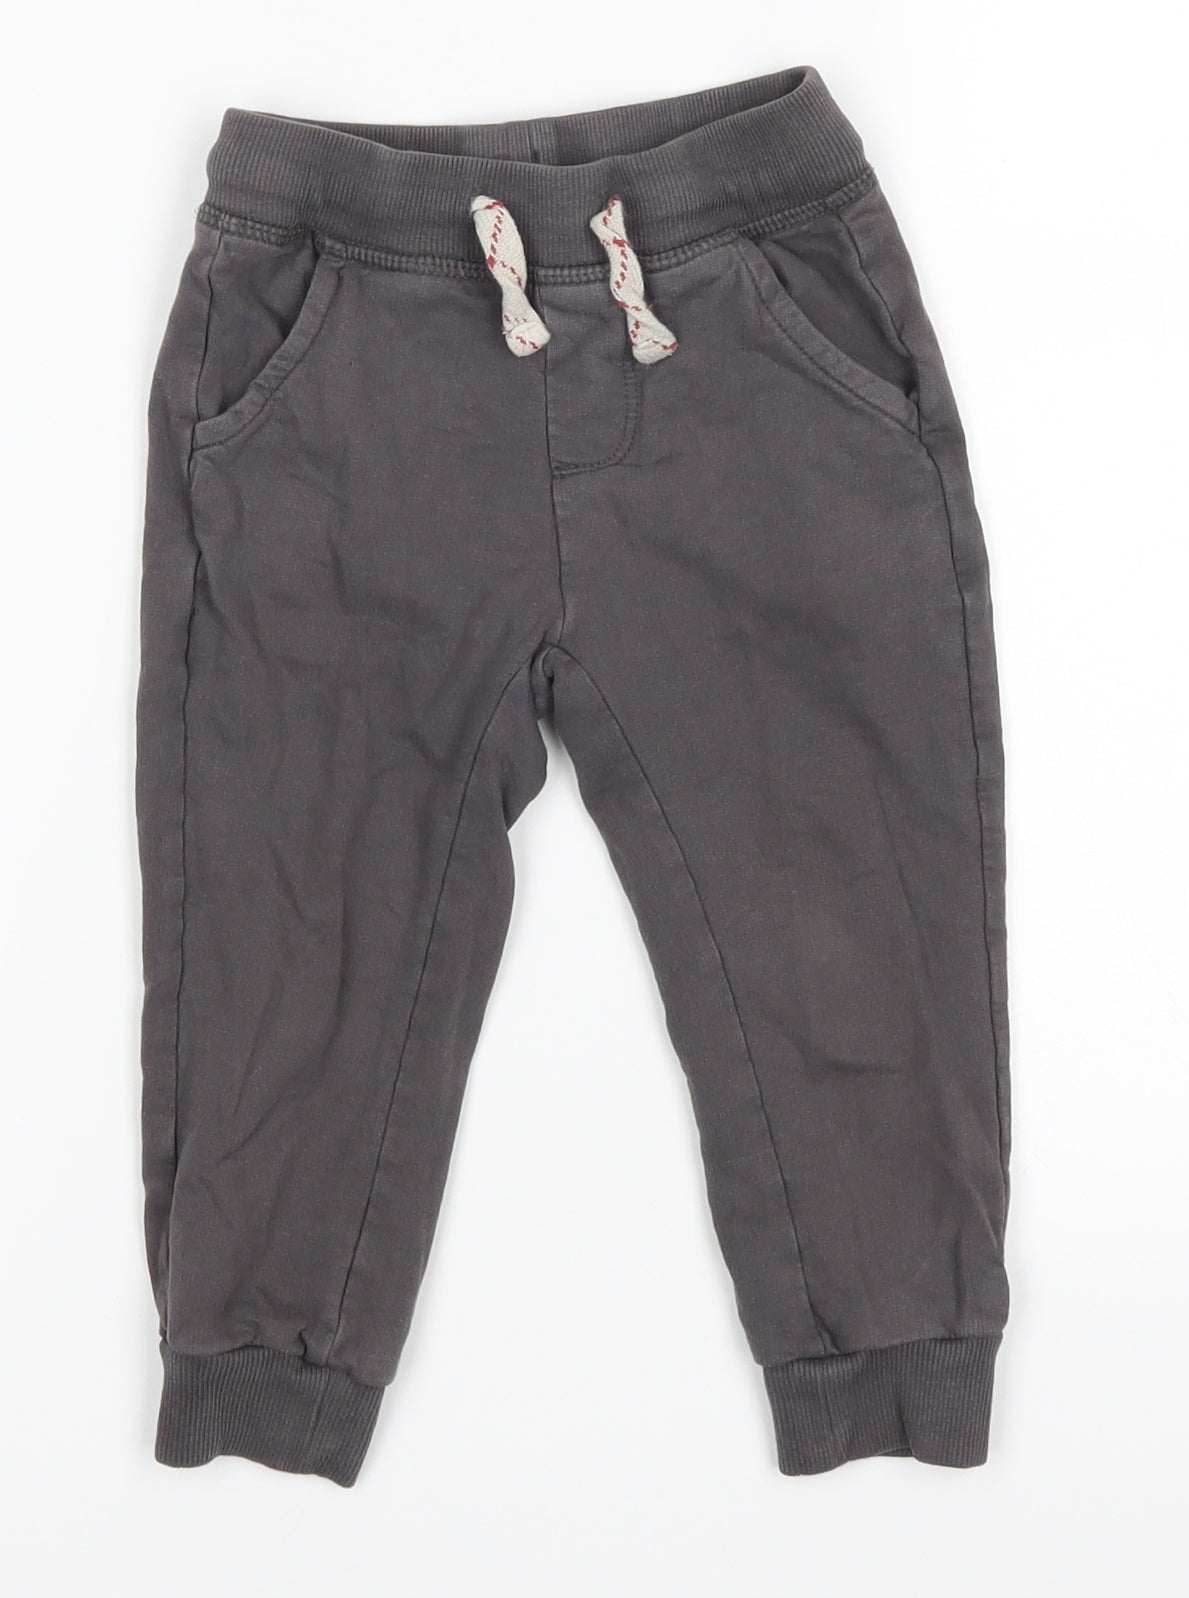 Cool Club Boys Grey   Jogger Trousers Size 2-3 Years